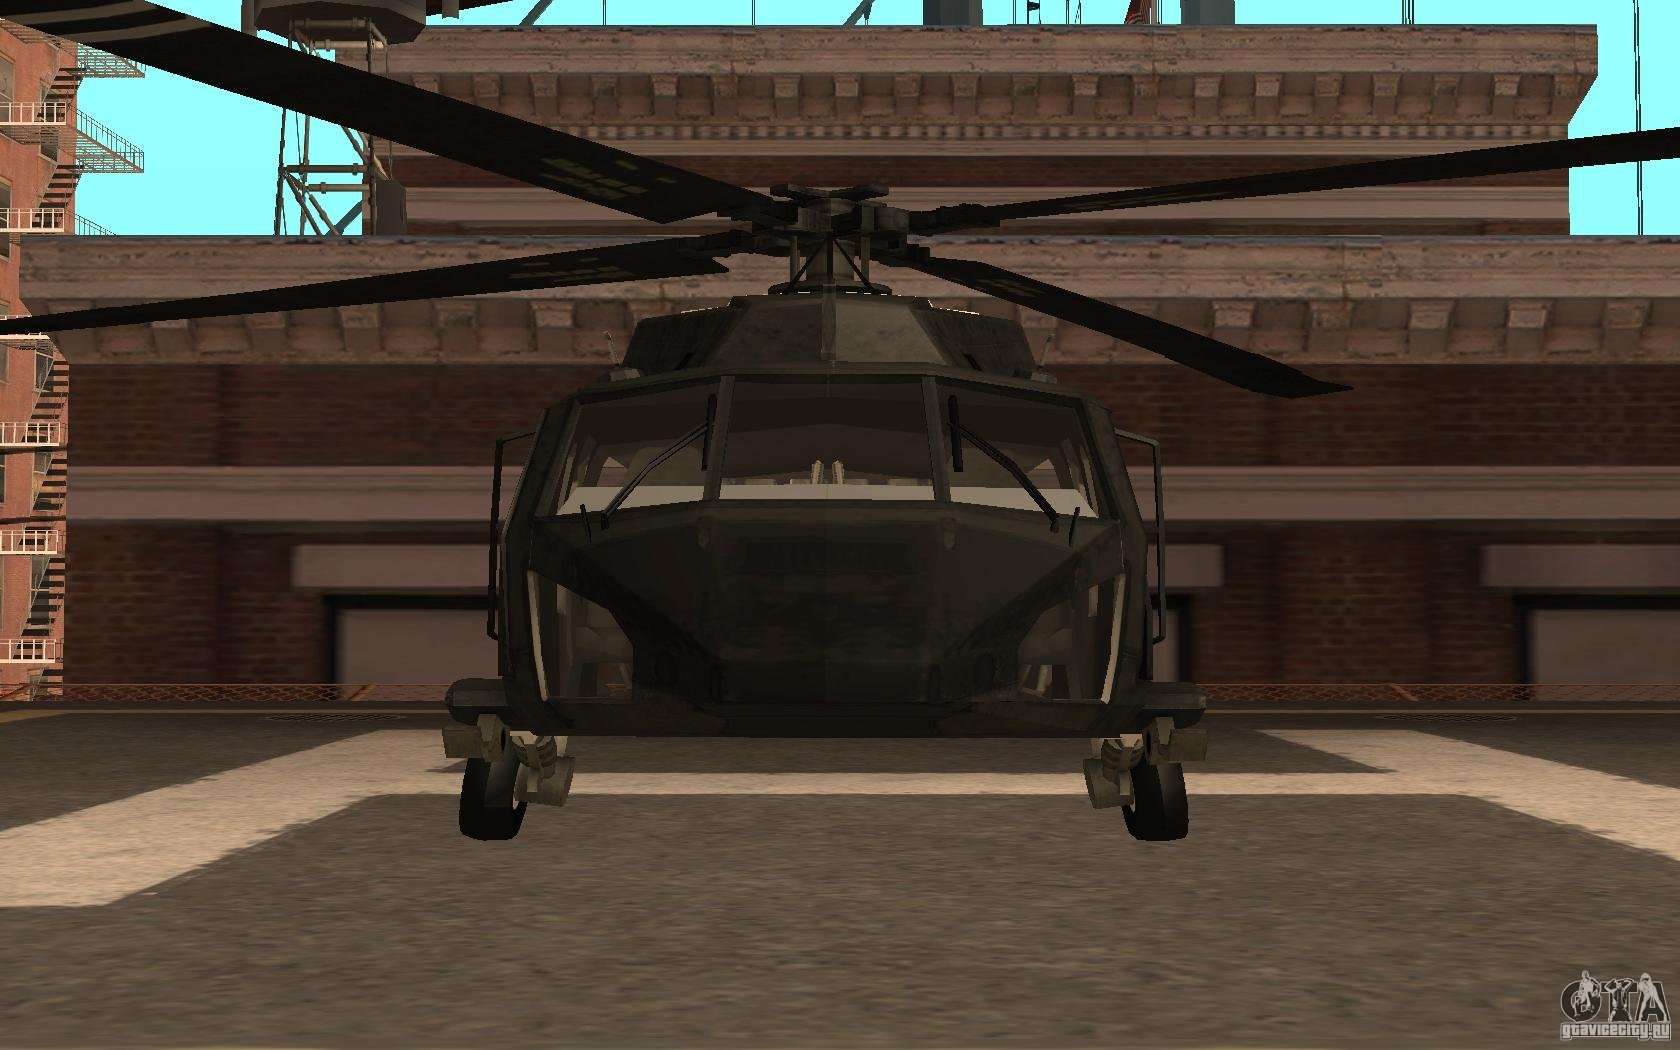 A helicopter from the game TimeShift Black for GTA San Andreas